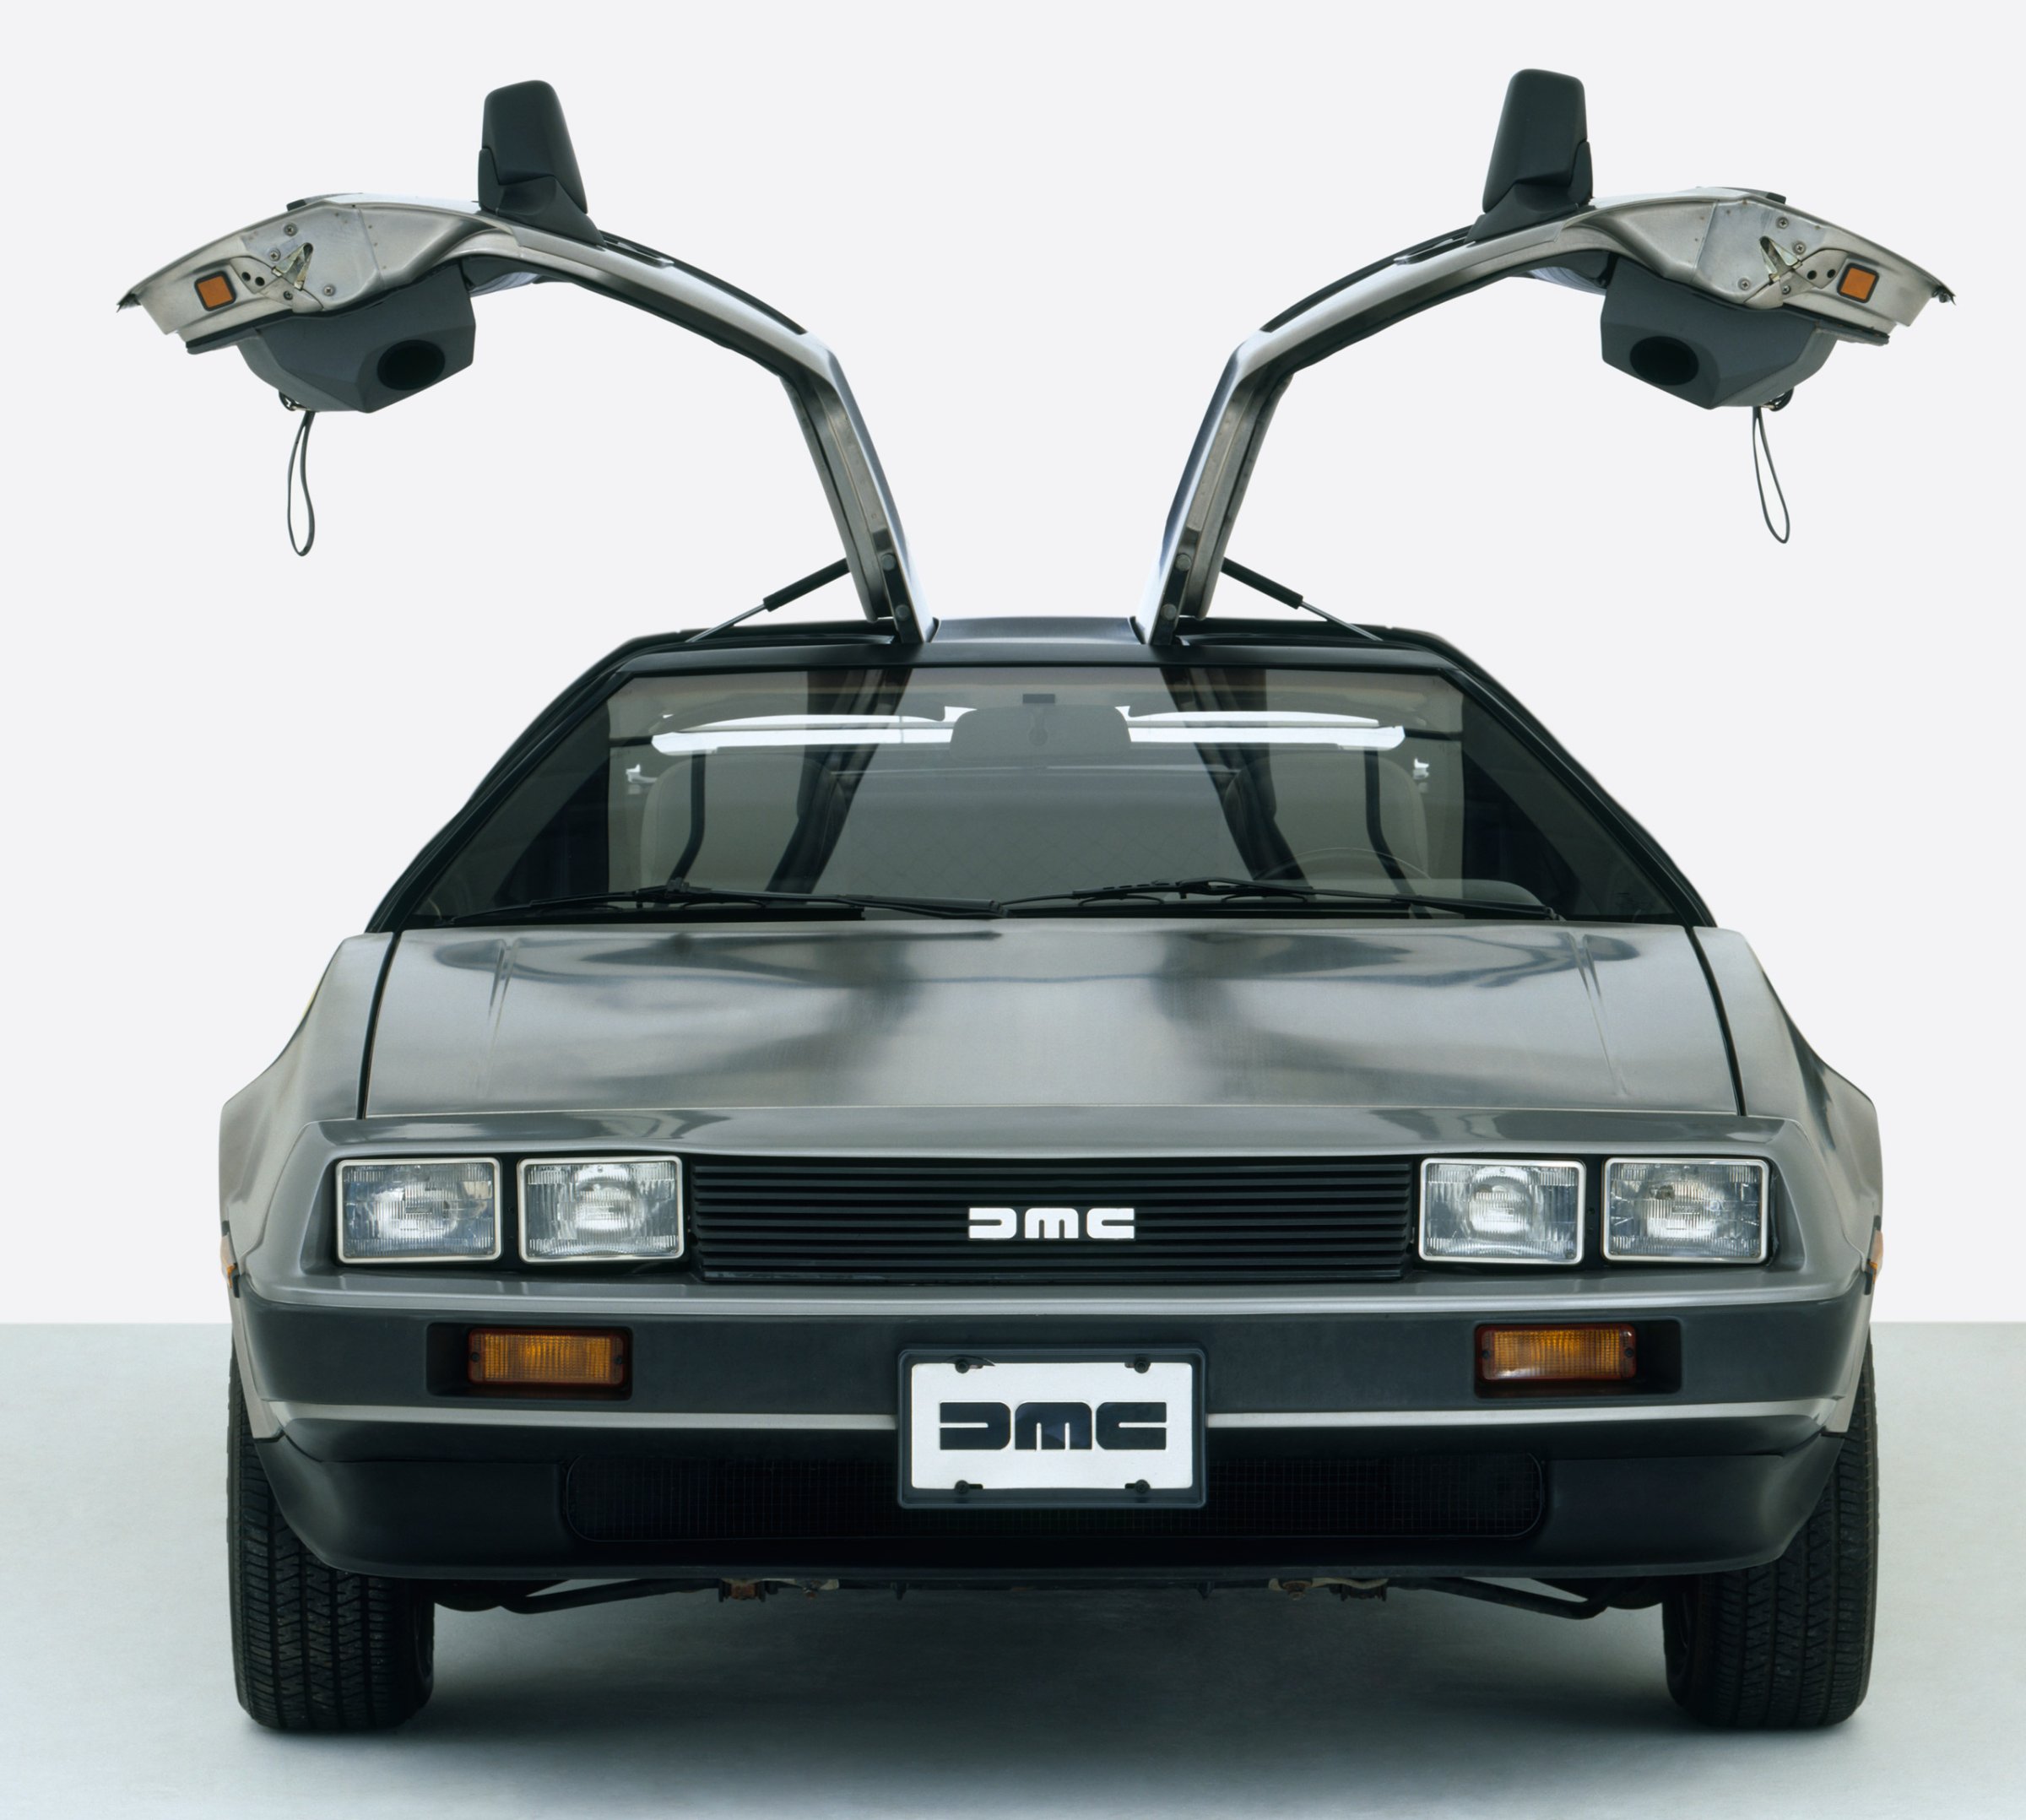 DeLorean DMC 12 with gullwing doors, 1979-82, front view.